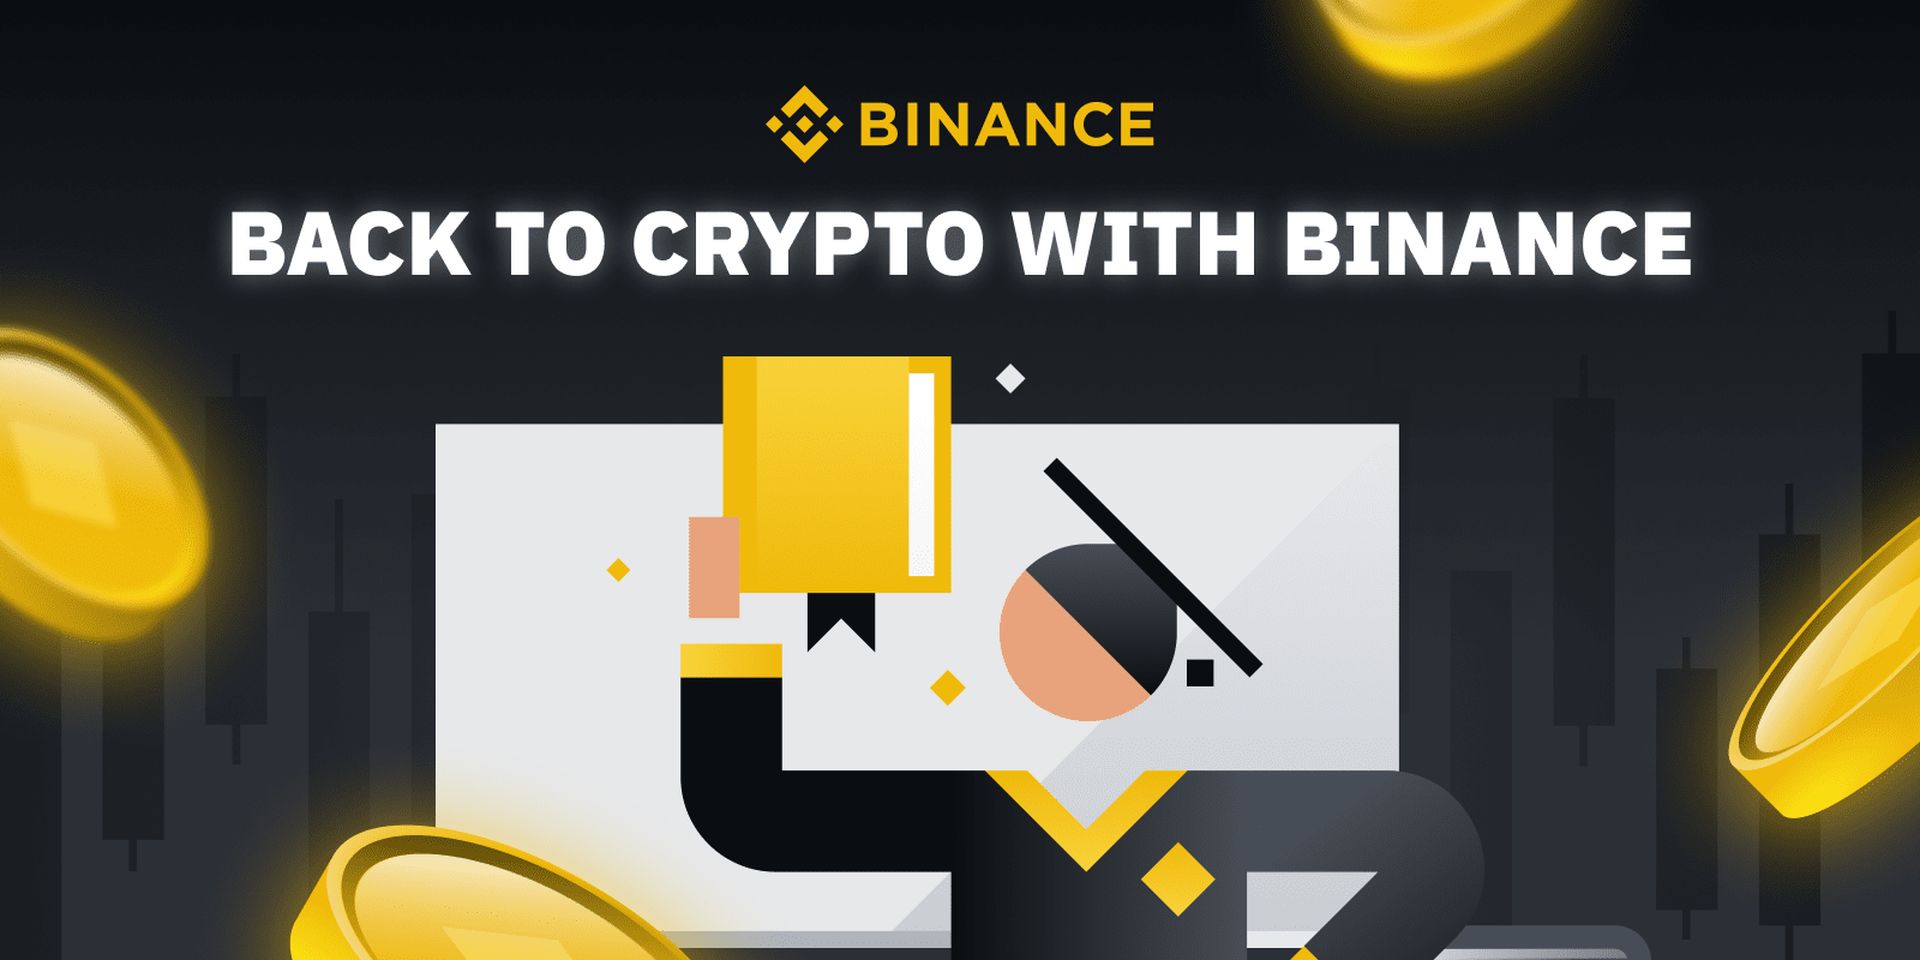 In this article, we are going to be covering TrueFi Binance quiz answers, so you can earn 10 TRU coins for free while you are learning more about crypto.